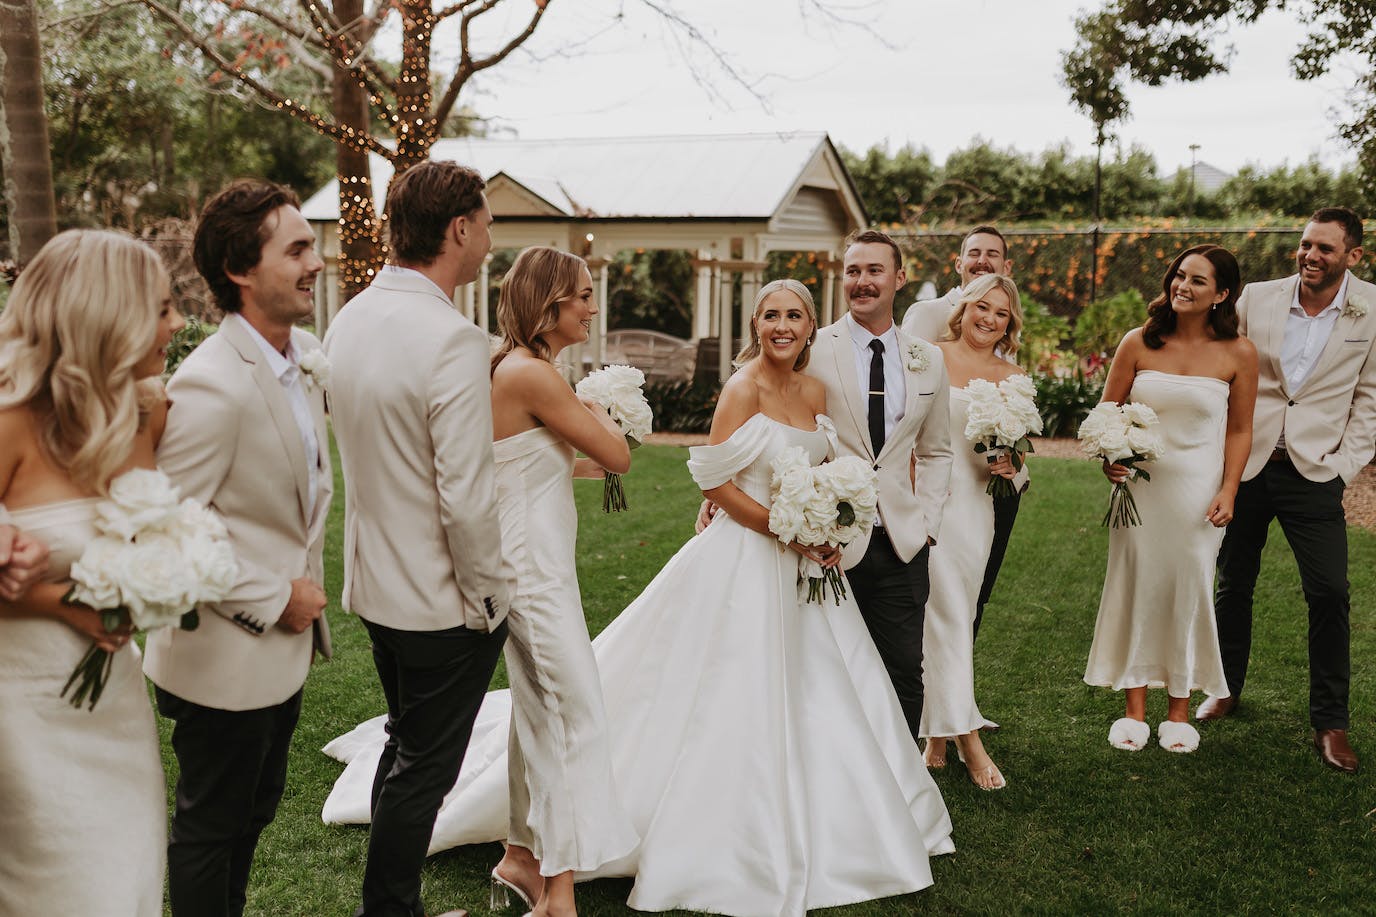 A joyful wedding party stands on a green lawn. The bride in a white gown holds a bouquet, surrounded by bridesmaids in white dresses and groomsmen in light-colored suits. Everyone is smiling, and the background features trees, a small building, and lit string lights.